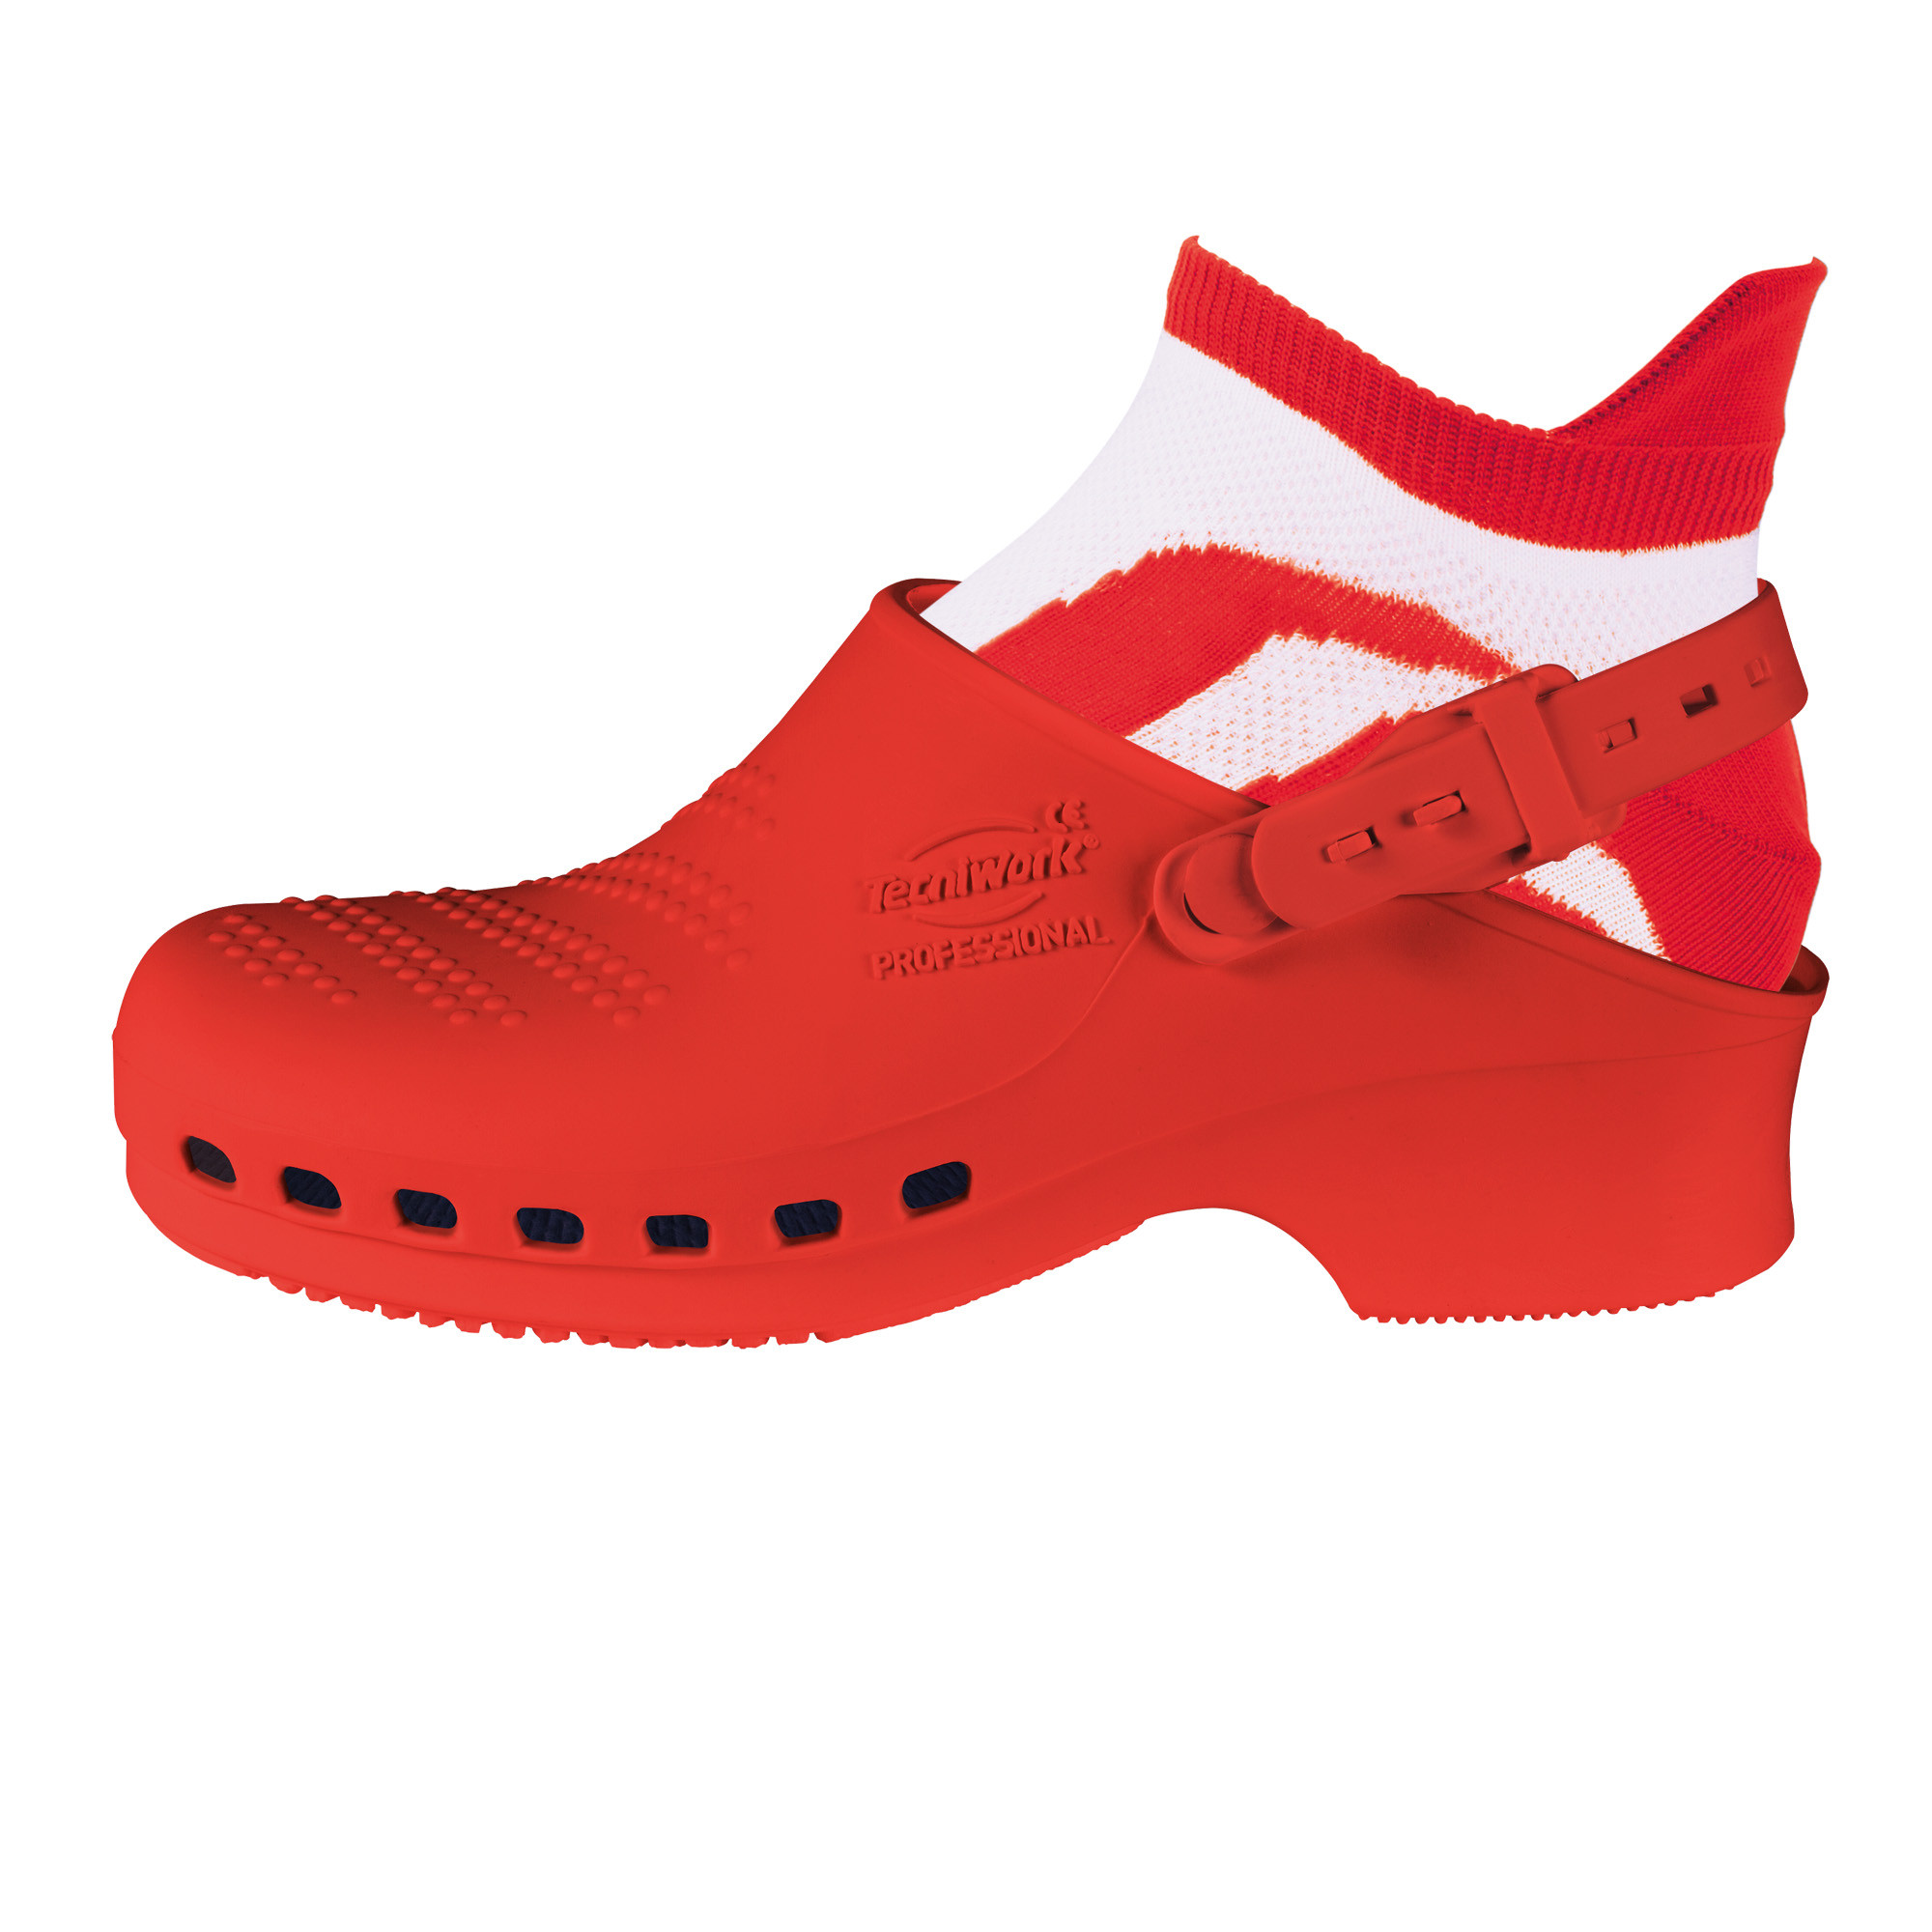 Professional sanitary clogs red Size 43/44